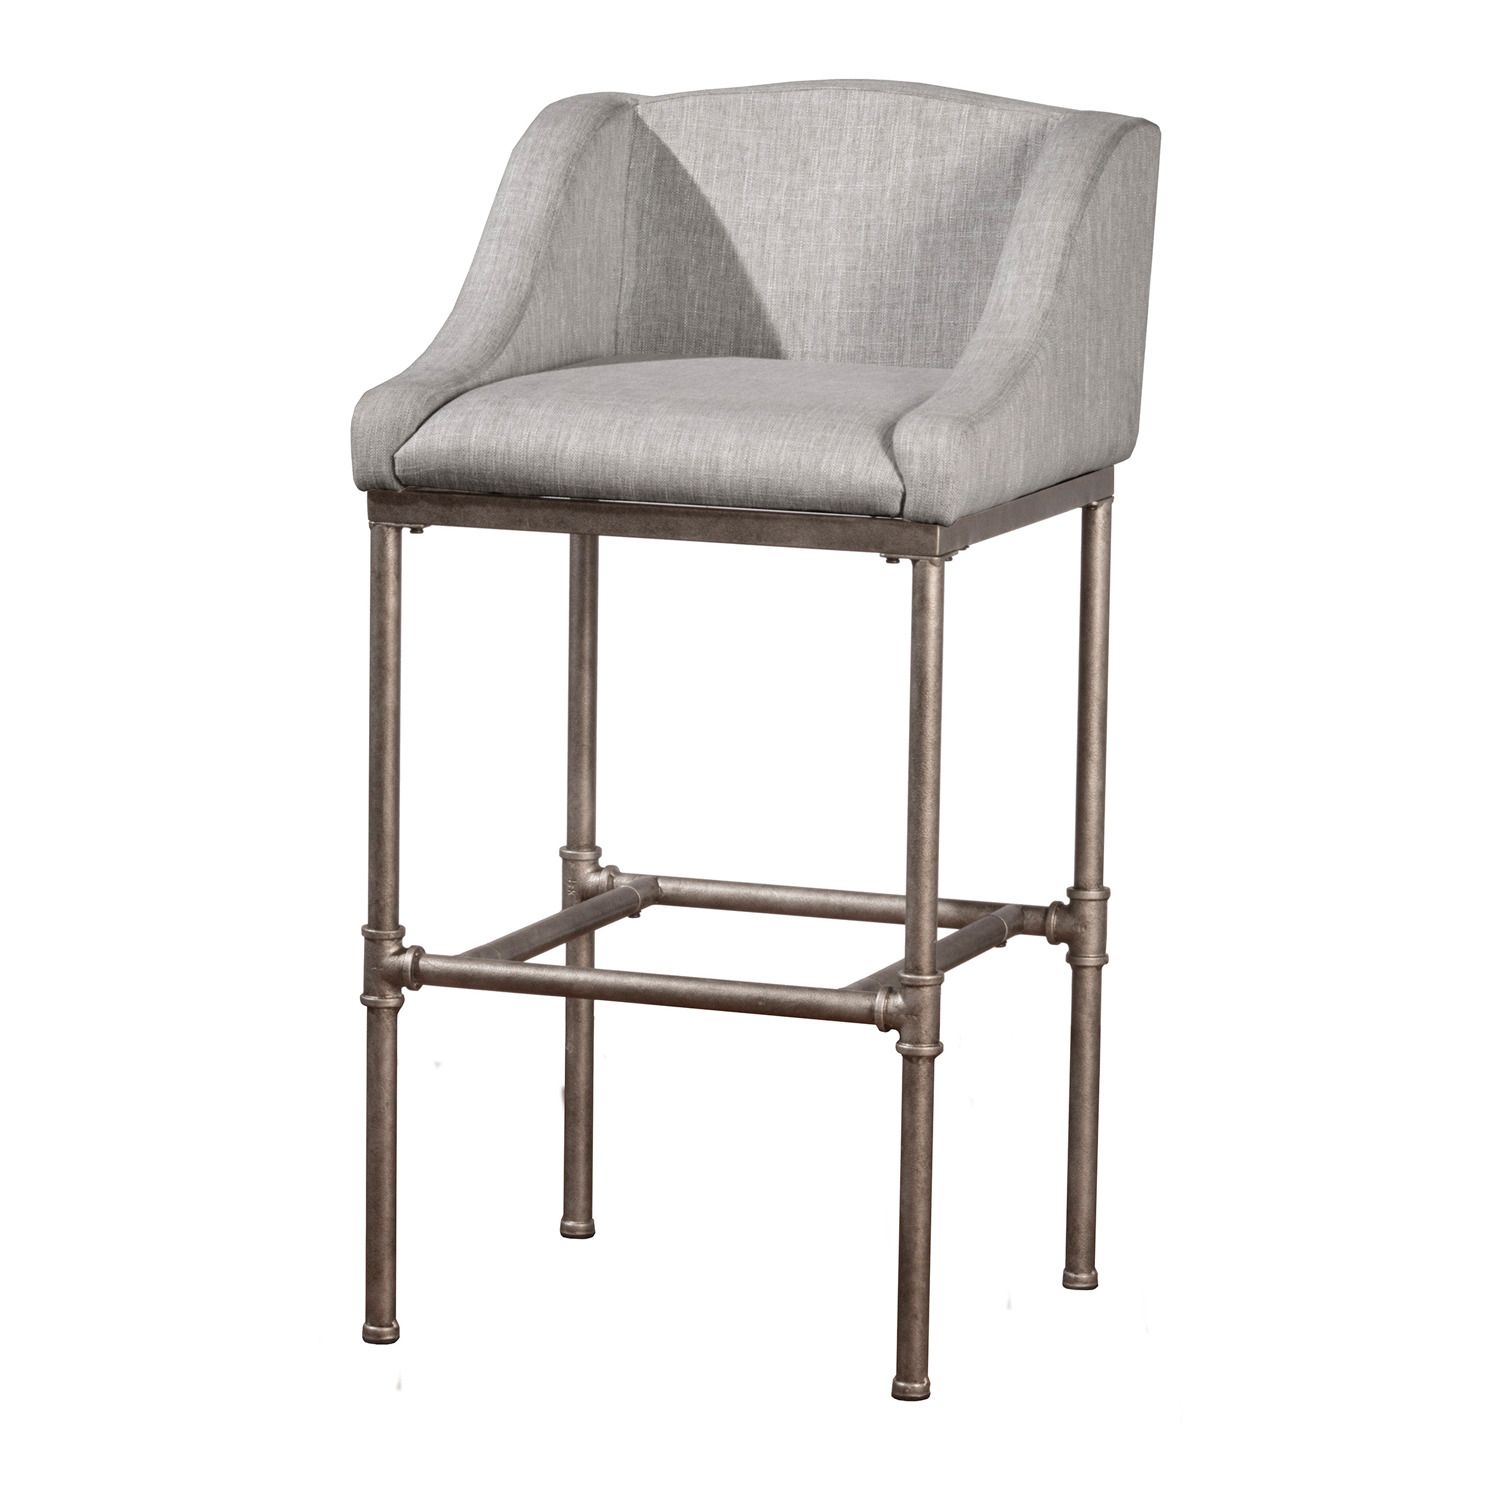 Image for Hillsdale Furniture Dillon Non-Swivel Stool at Kohl's.